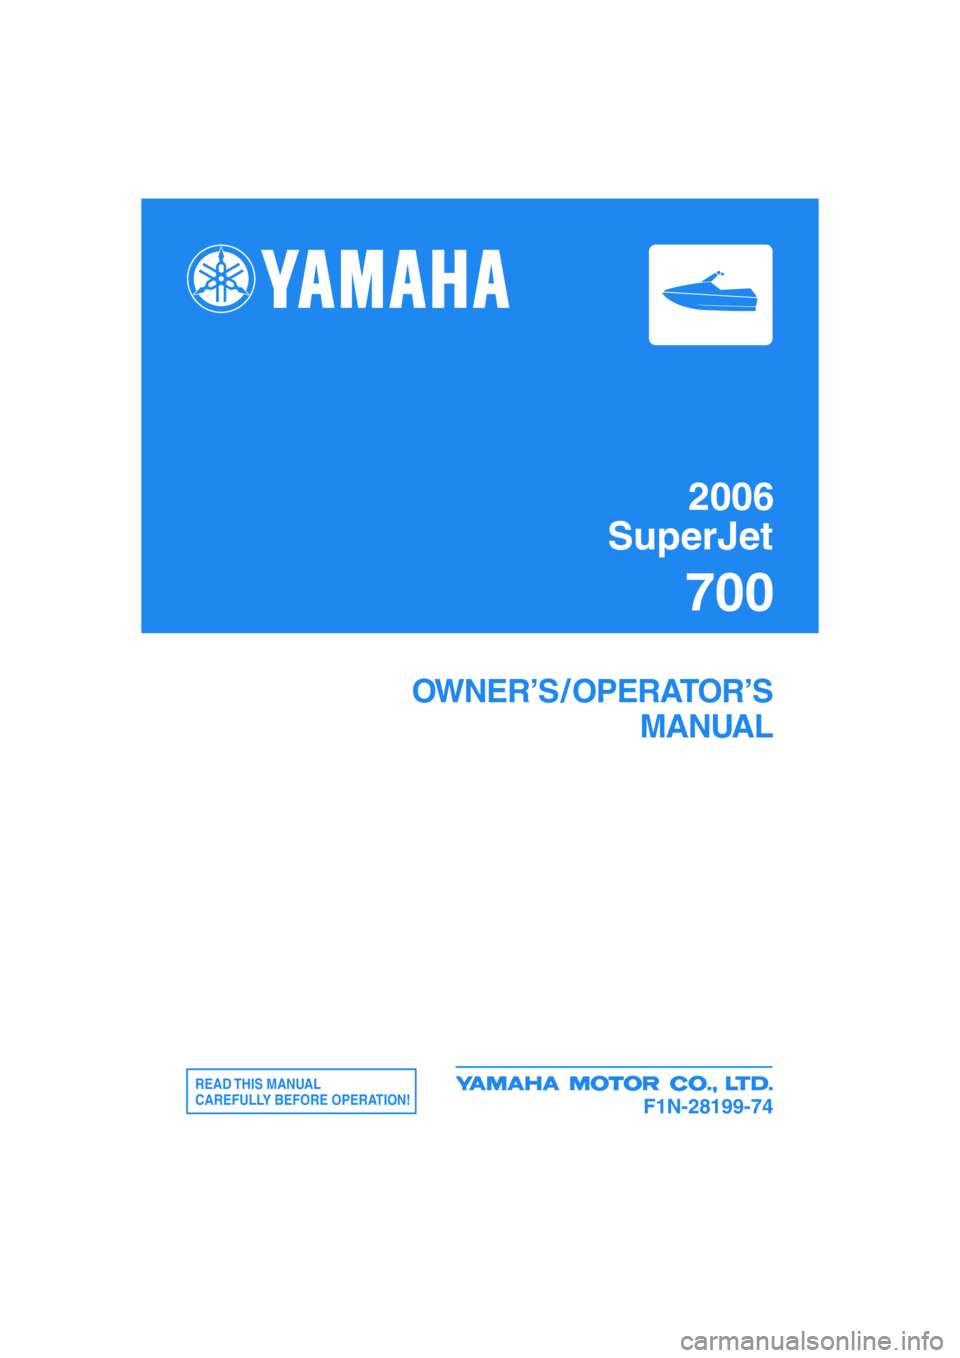 YAMAHA SUPERJET 2006  Owners Manual 2006
SuperJet
700
OWNER’S / OPERATOR’S
MANUAL
READ THIS  MANUAL
CAREFULLY BEFORE OPERATION!
F1N-28199-74 